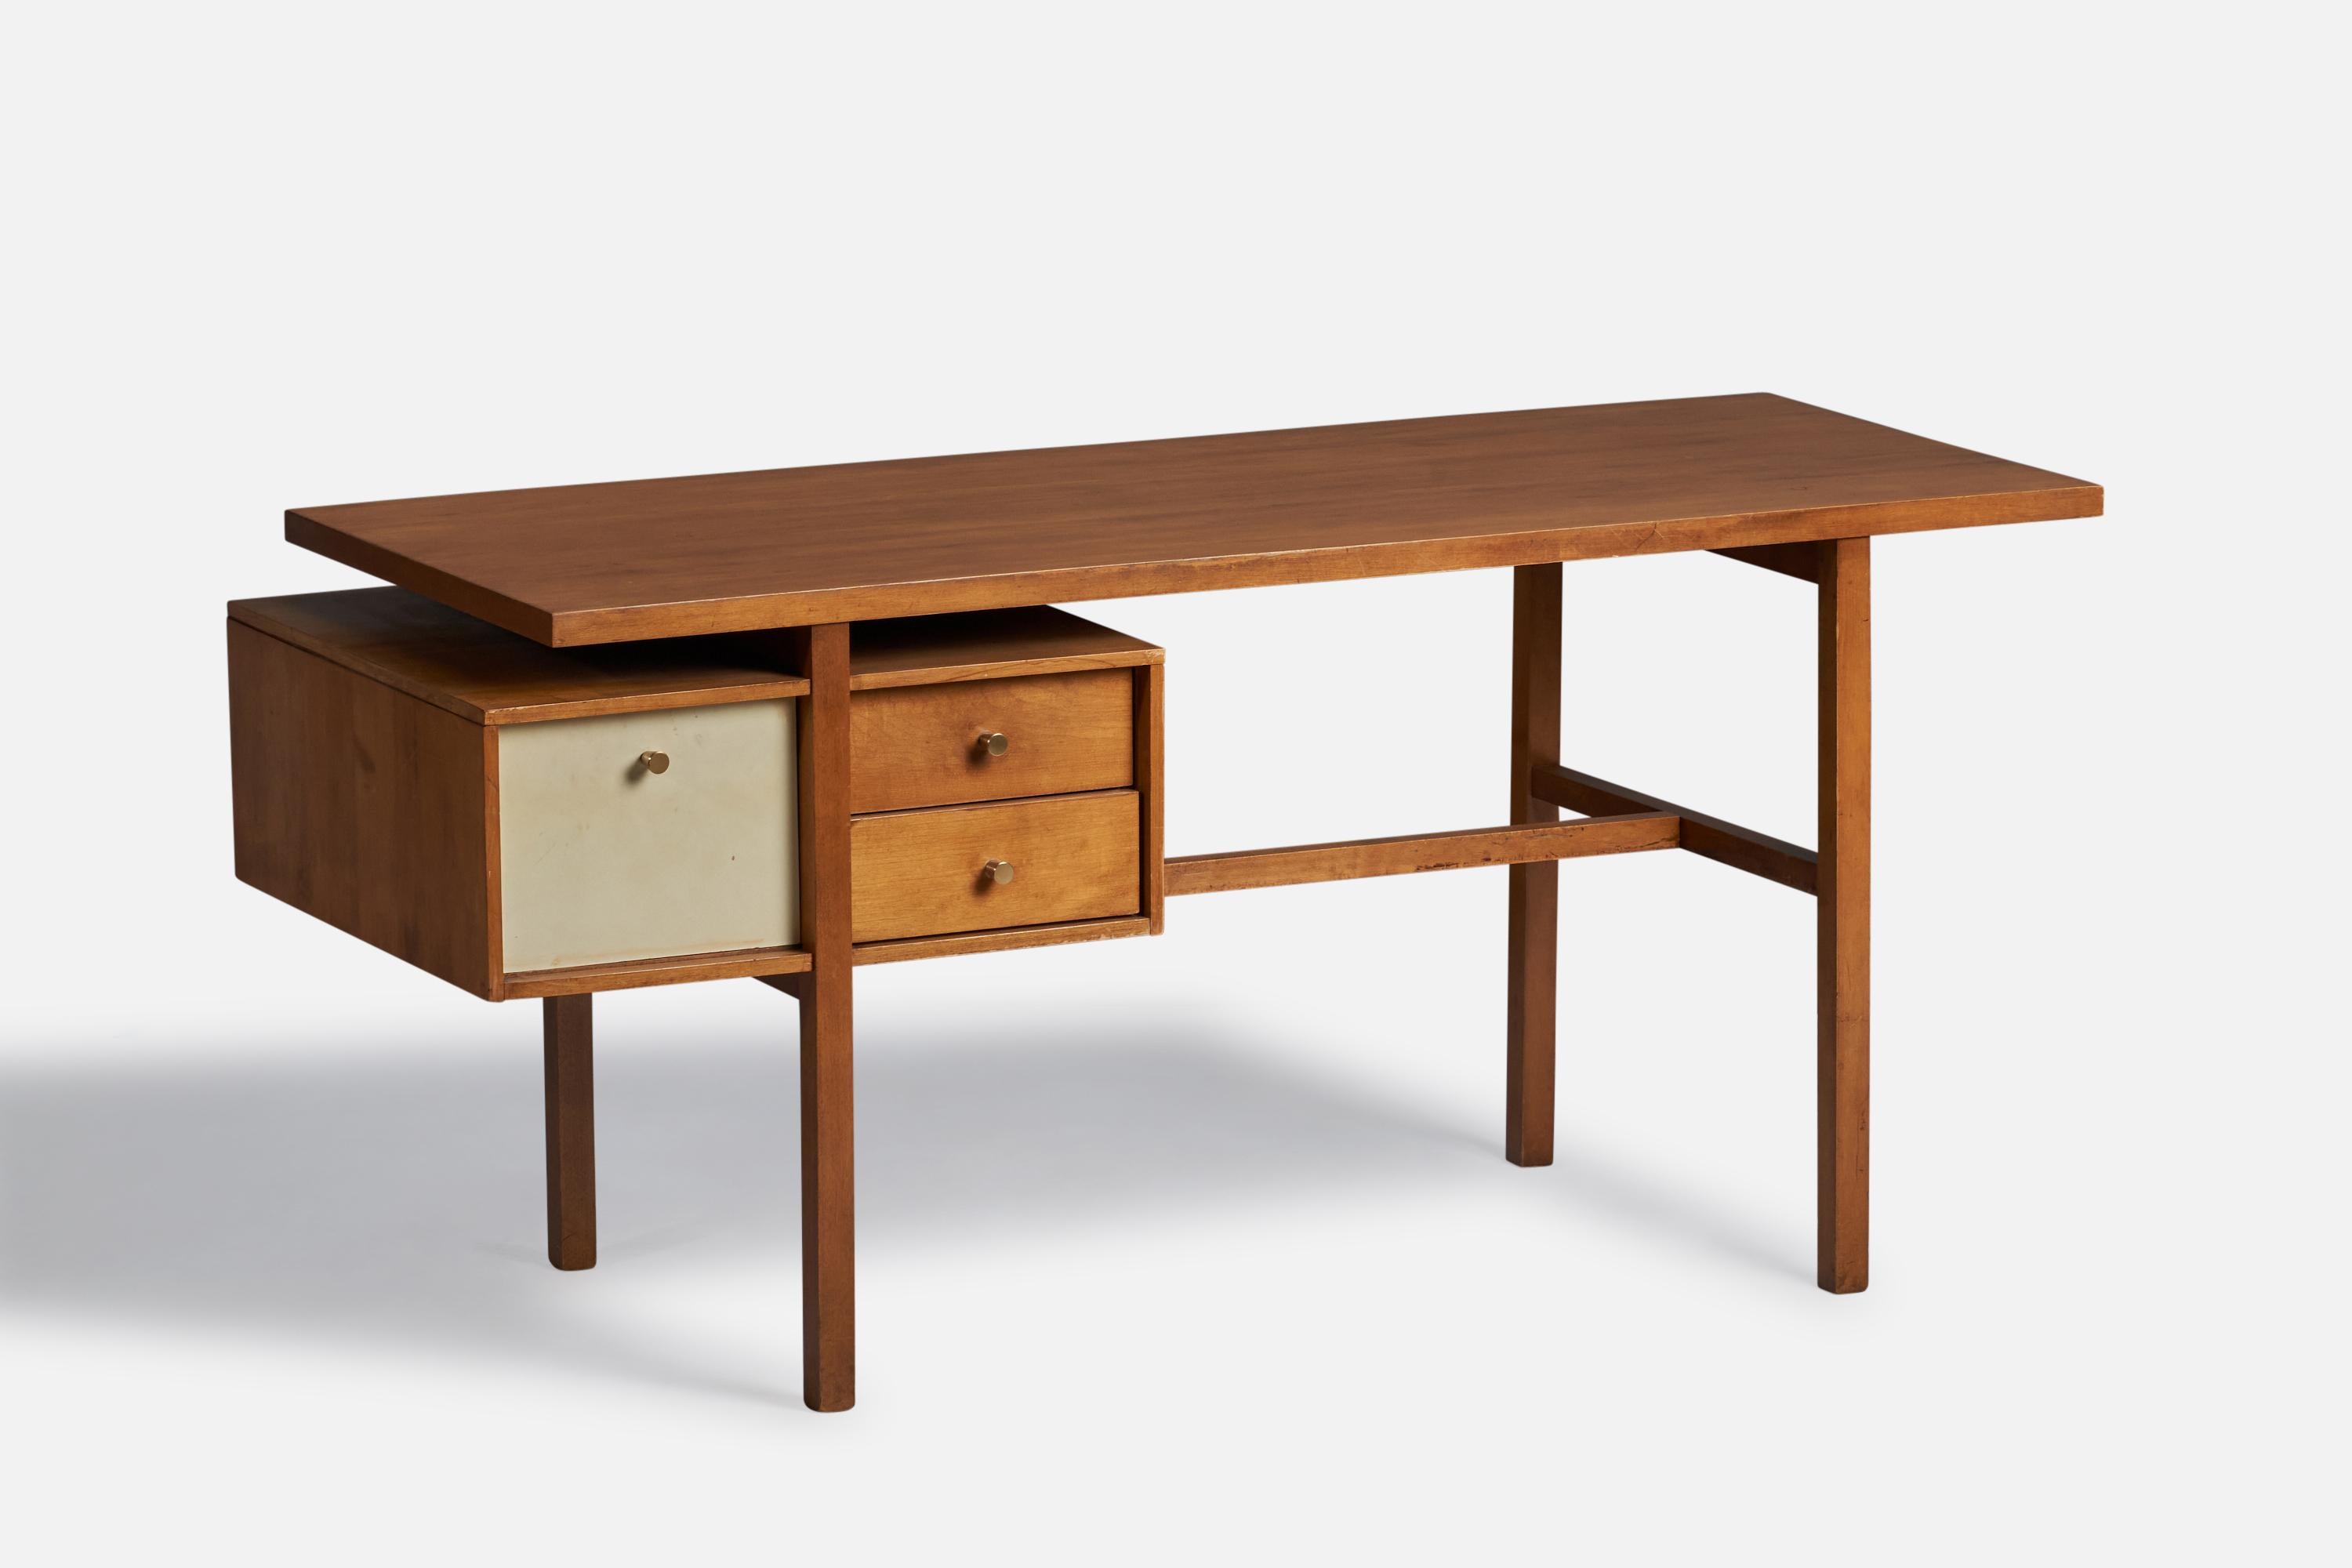 A rare walnut and brass desk designed by Milo Baughman and produced by Glenn of California, USA, 1950s.